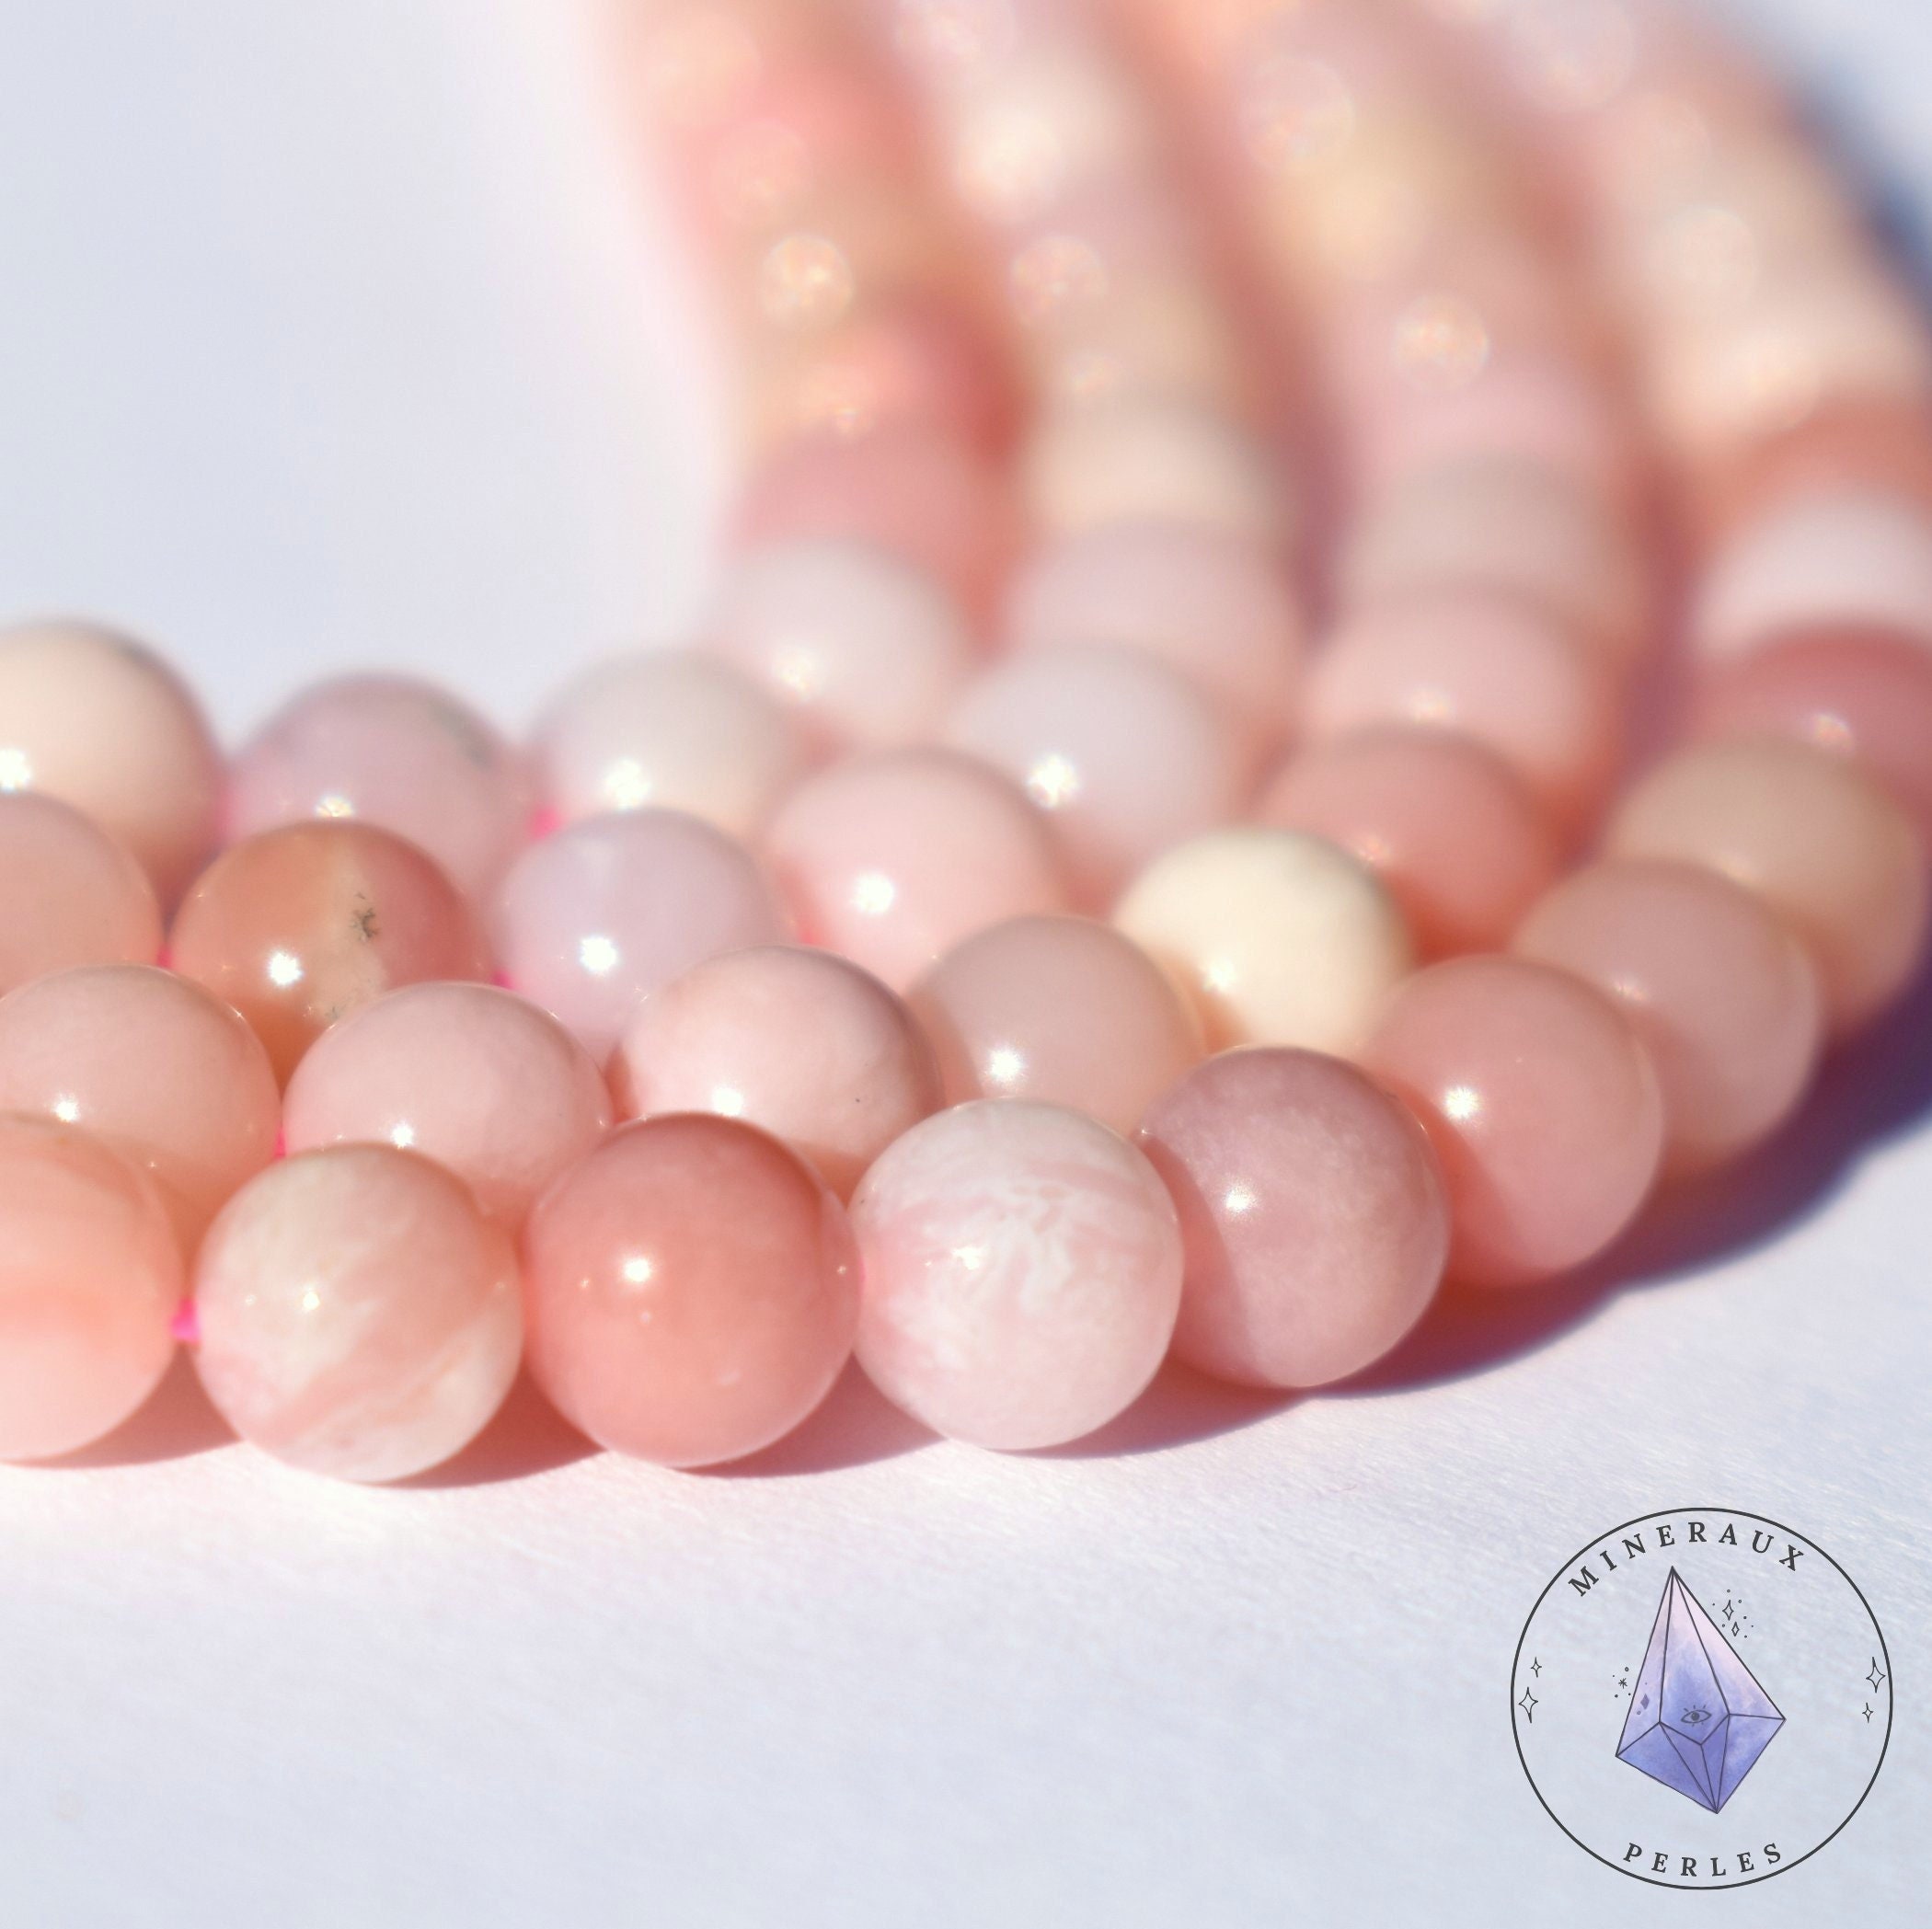 Natural Peruvian Pink Opal Beads 4mm 5mm 6mm Faceted Round Micro